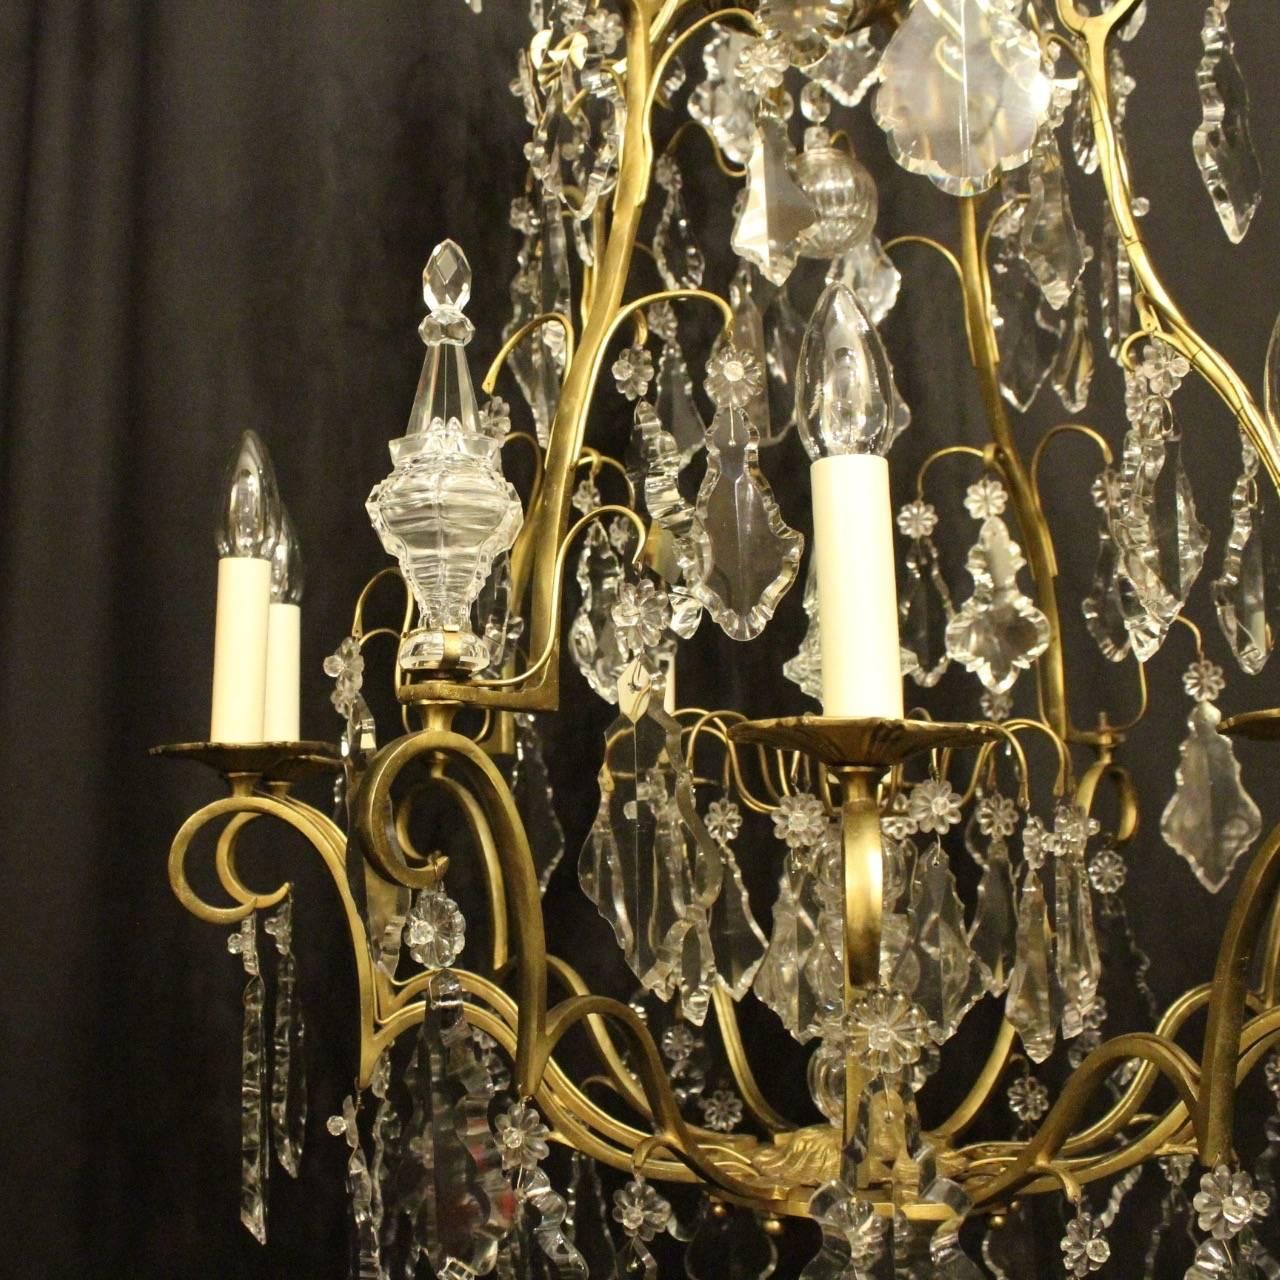 Rococo Revival French 19th Century Gilded and Crystal Eight-Light Cage Antique Chandelier For Sale